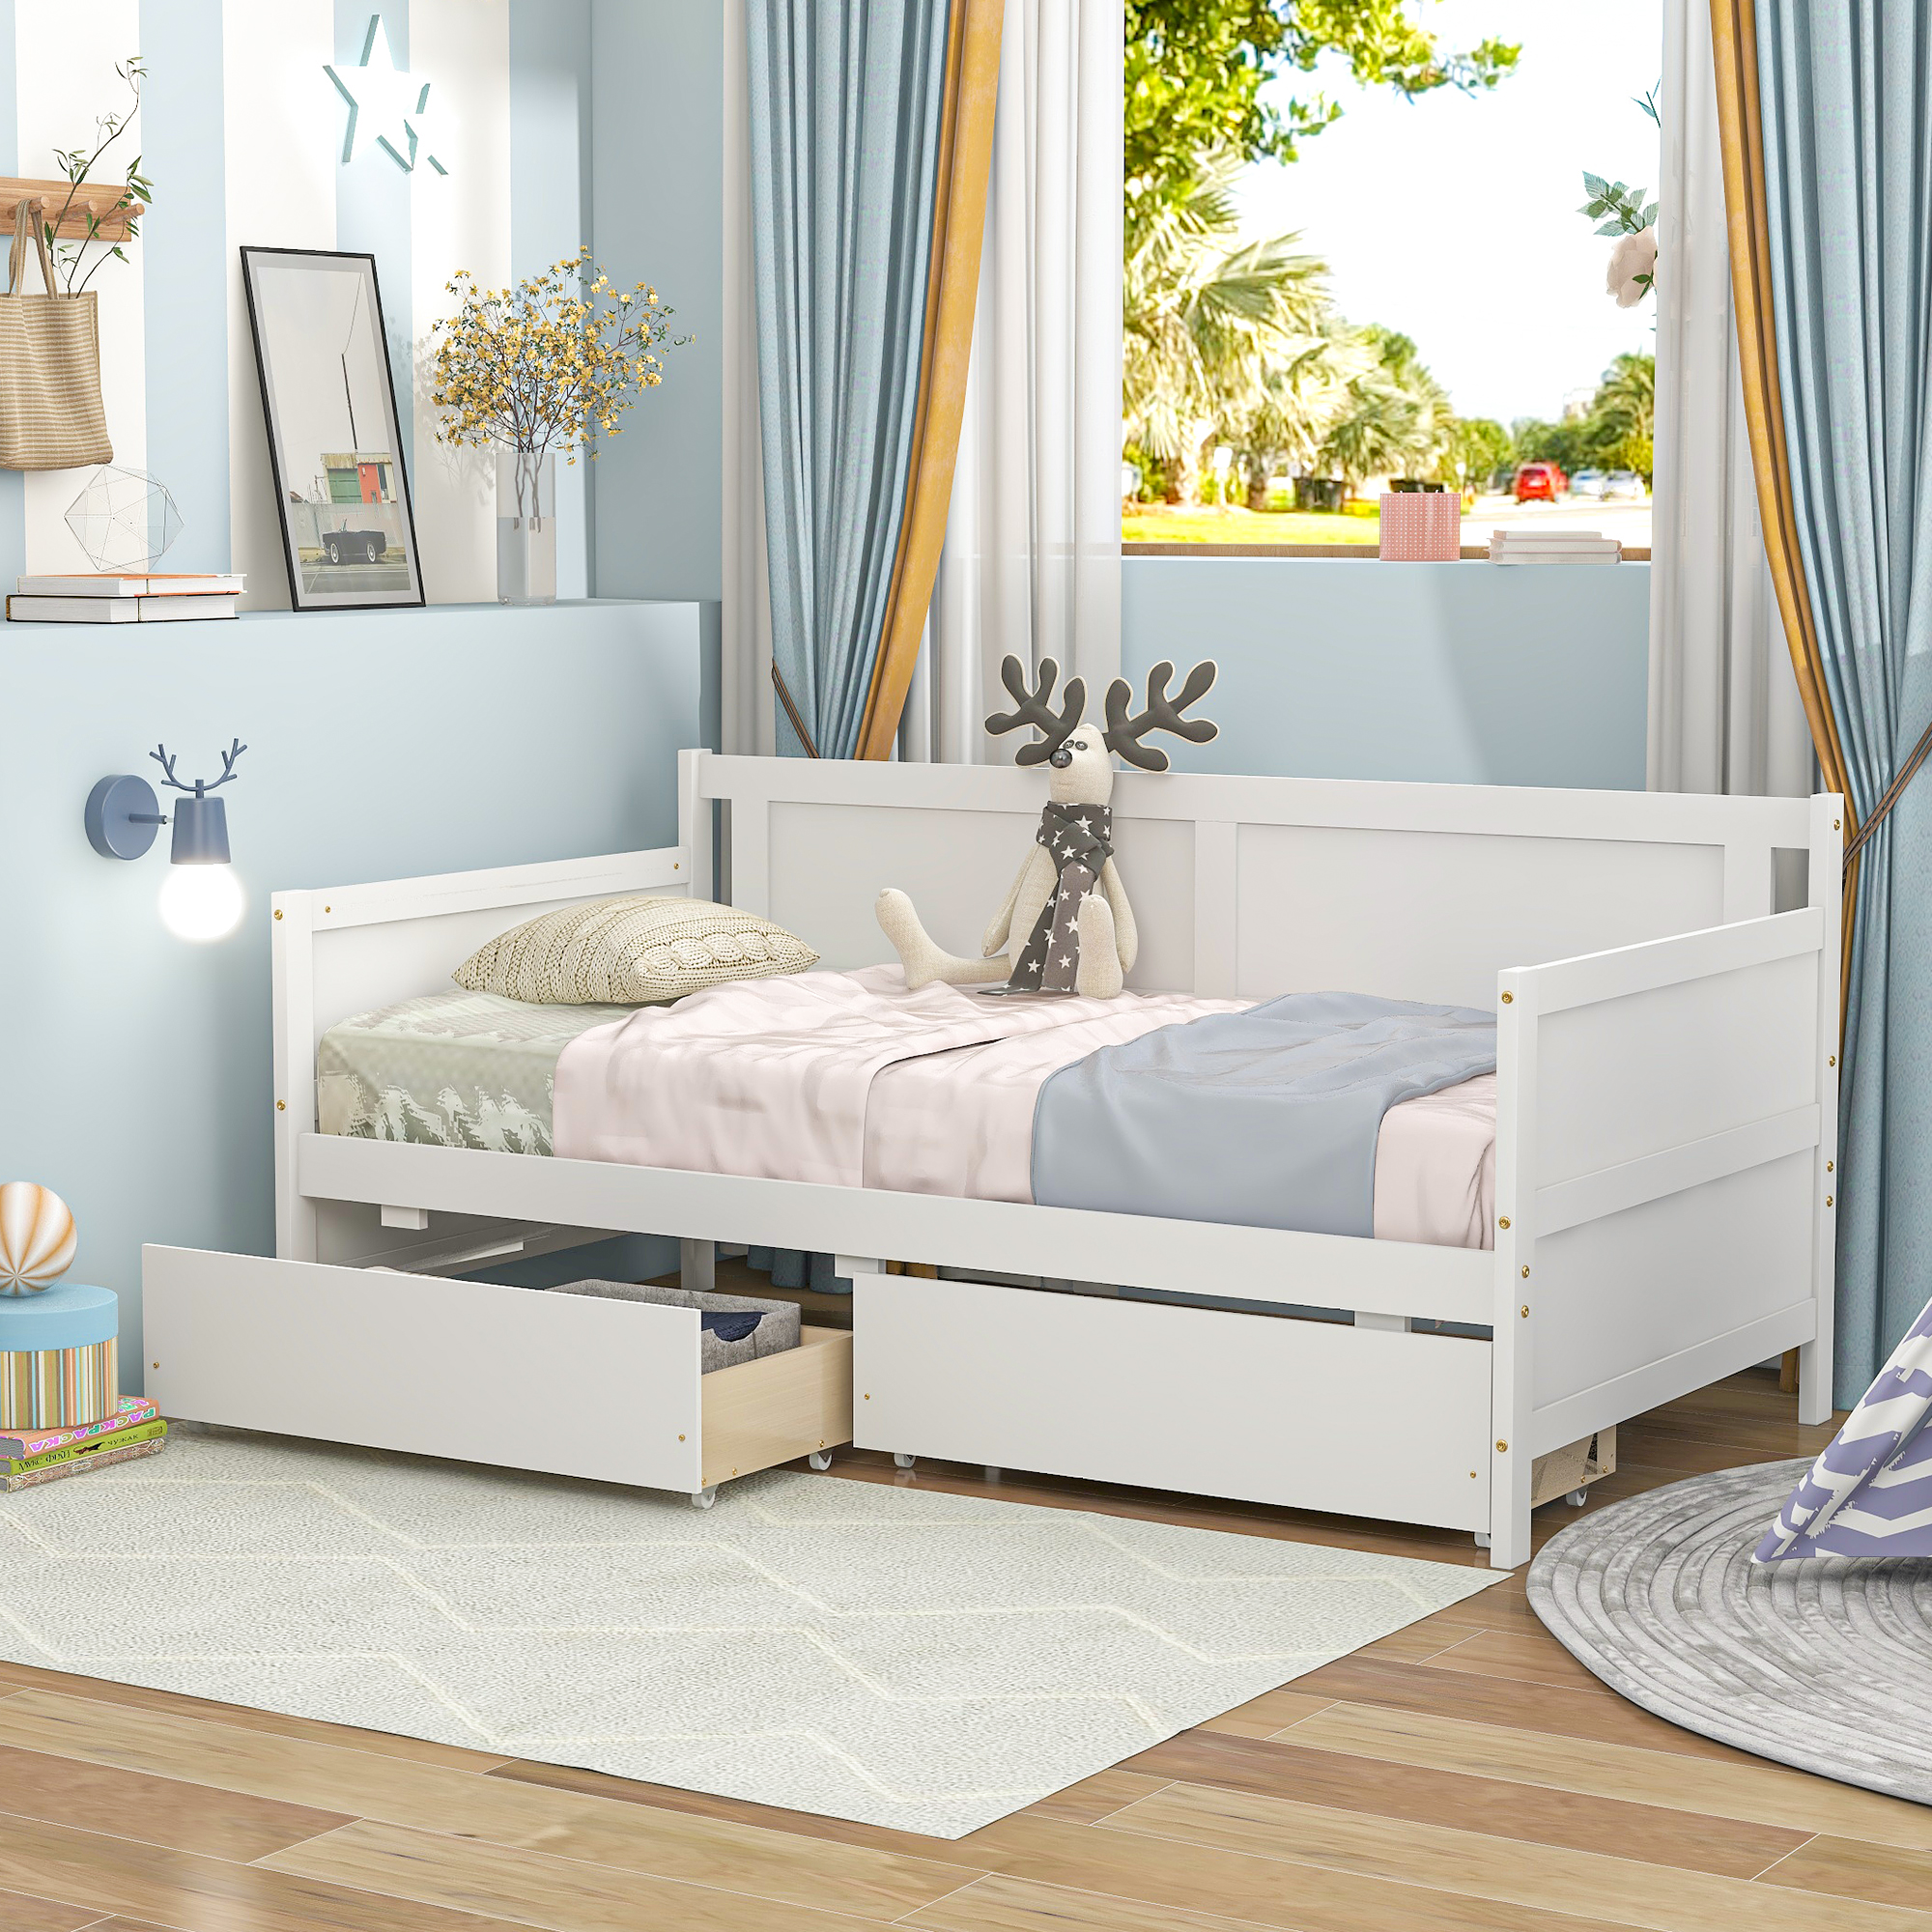 uhomepro White Daybed with Storage Drawers, Wood Twin Bed Frame Sofa Bed for Kids Girls Boys, Living Room Bedroom Furniture, No Box Spring Needed - image 1 of 11